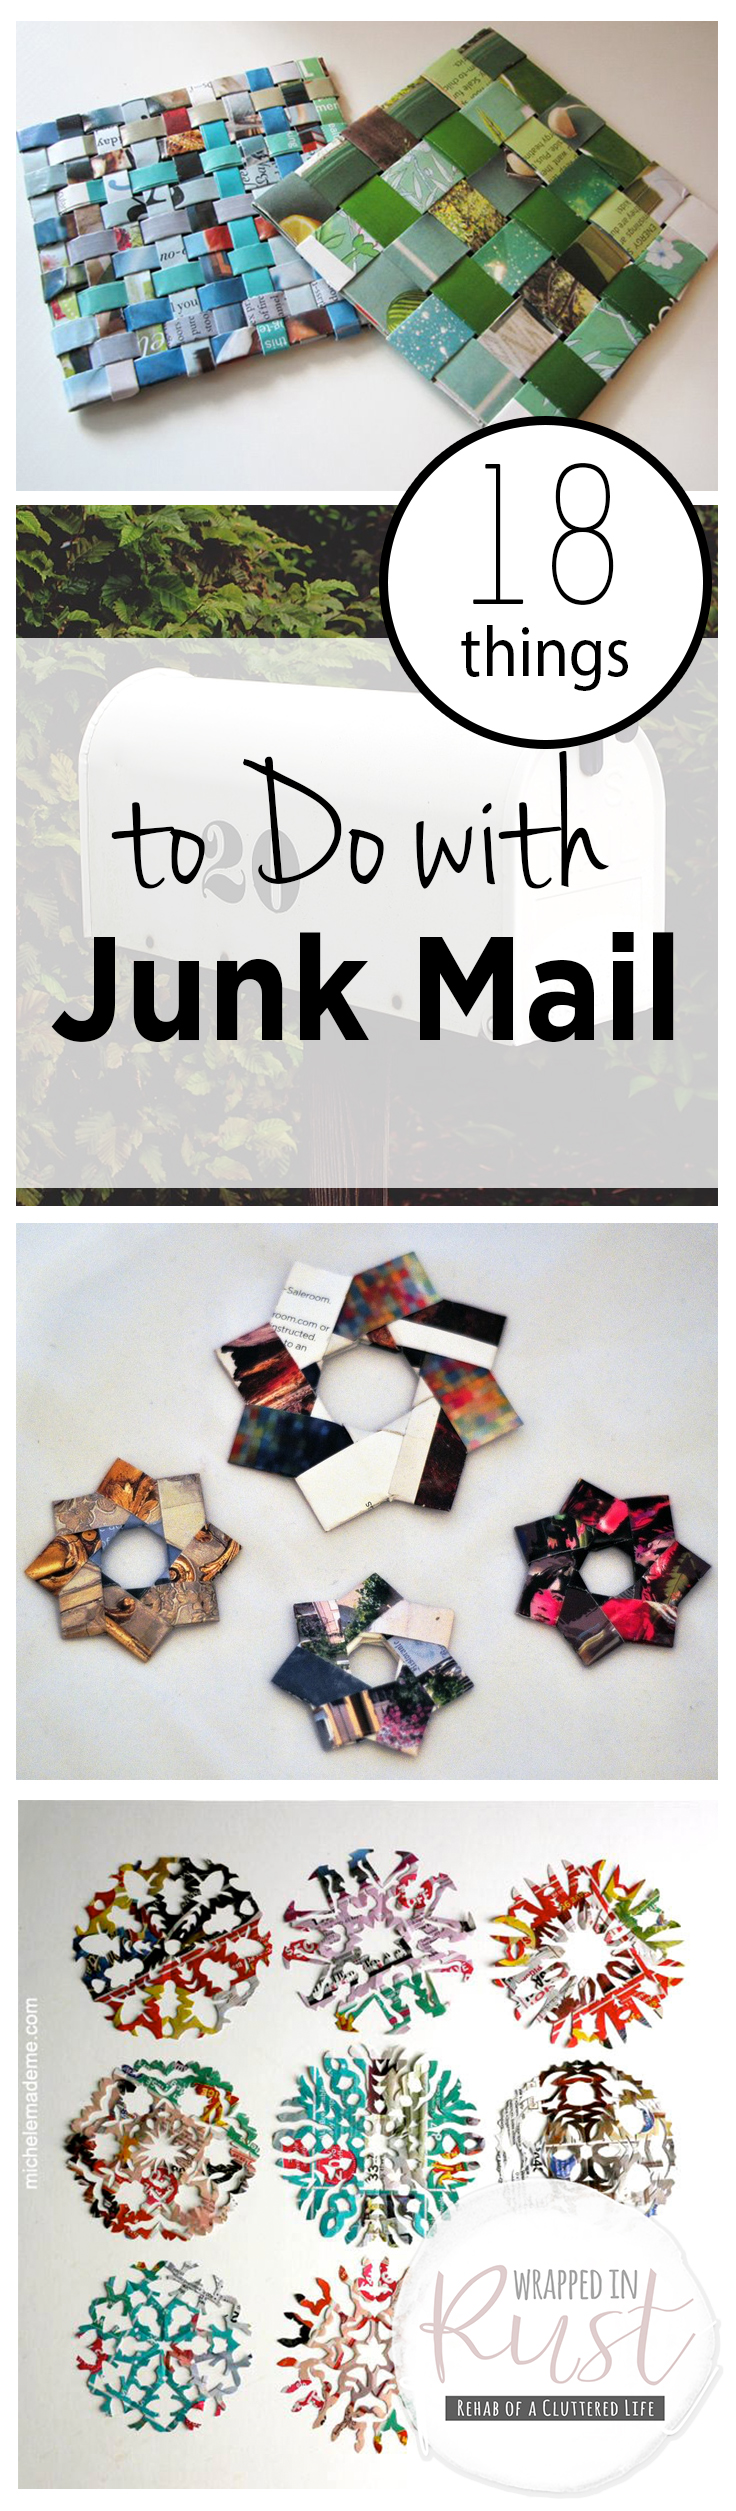 18 Things to Do with Junk Mail